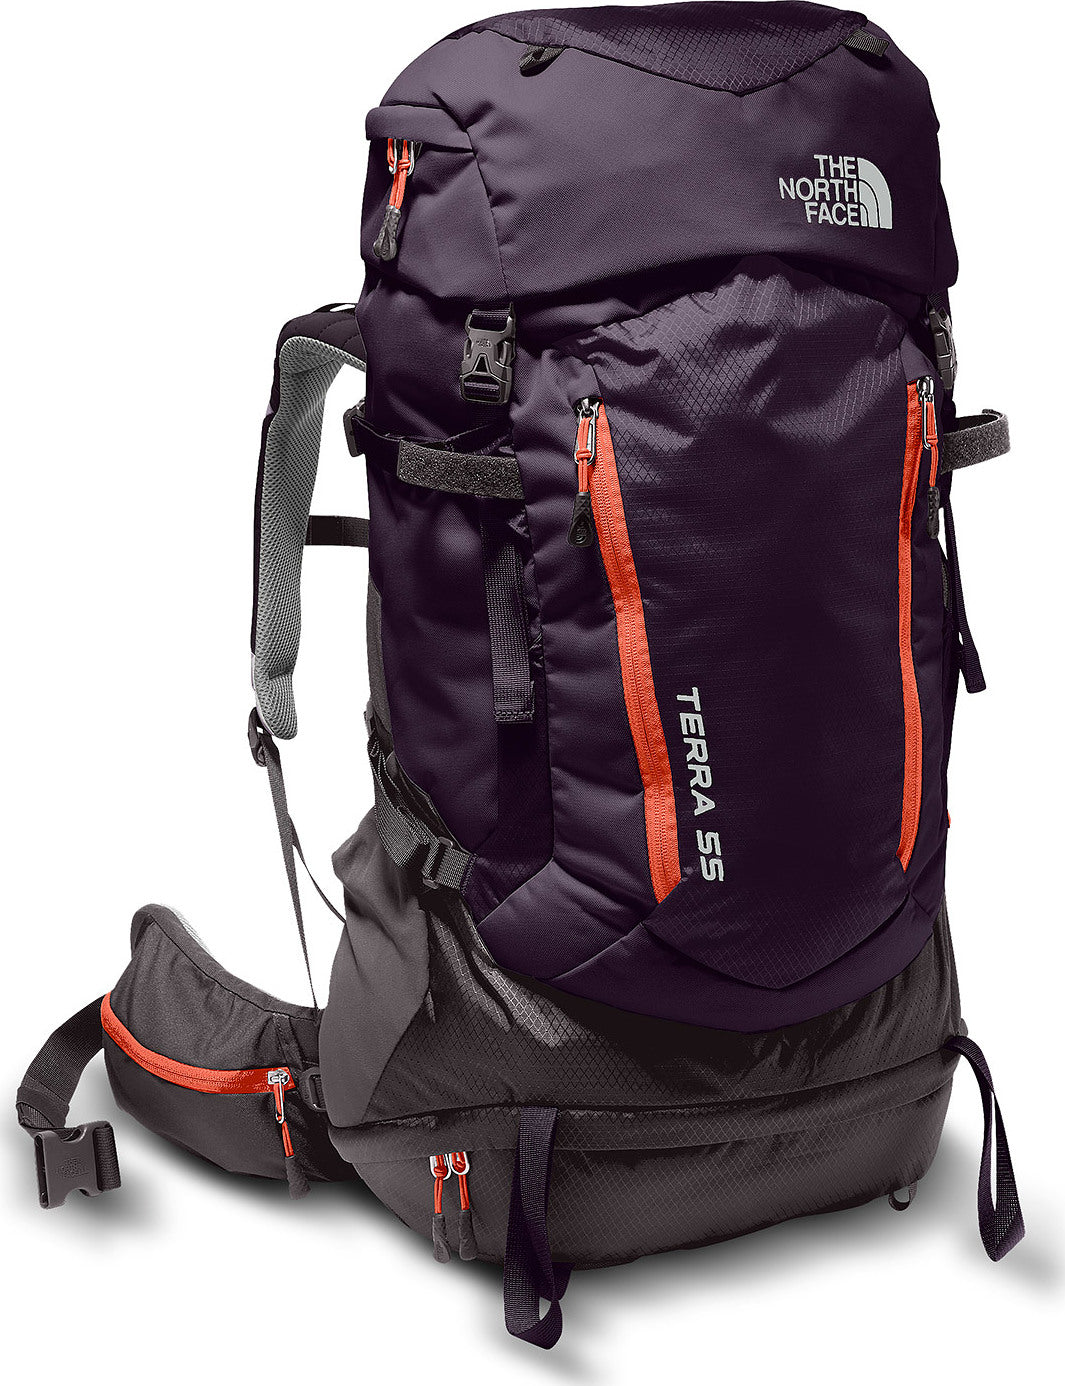 The North Face Terra 55 L Backpack - Women's